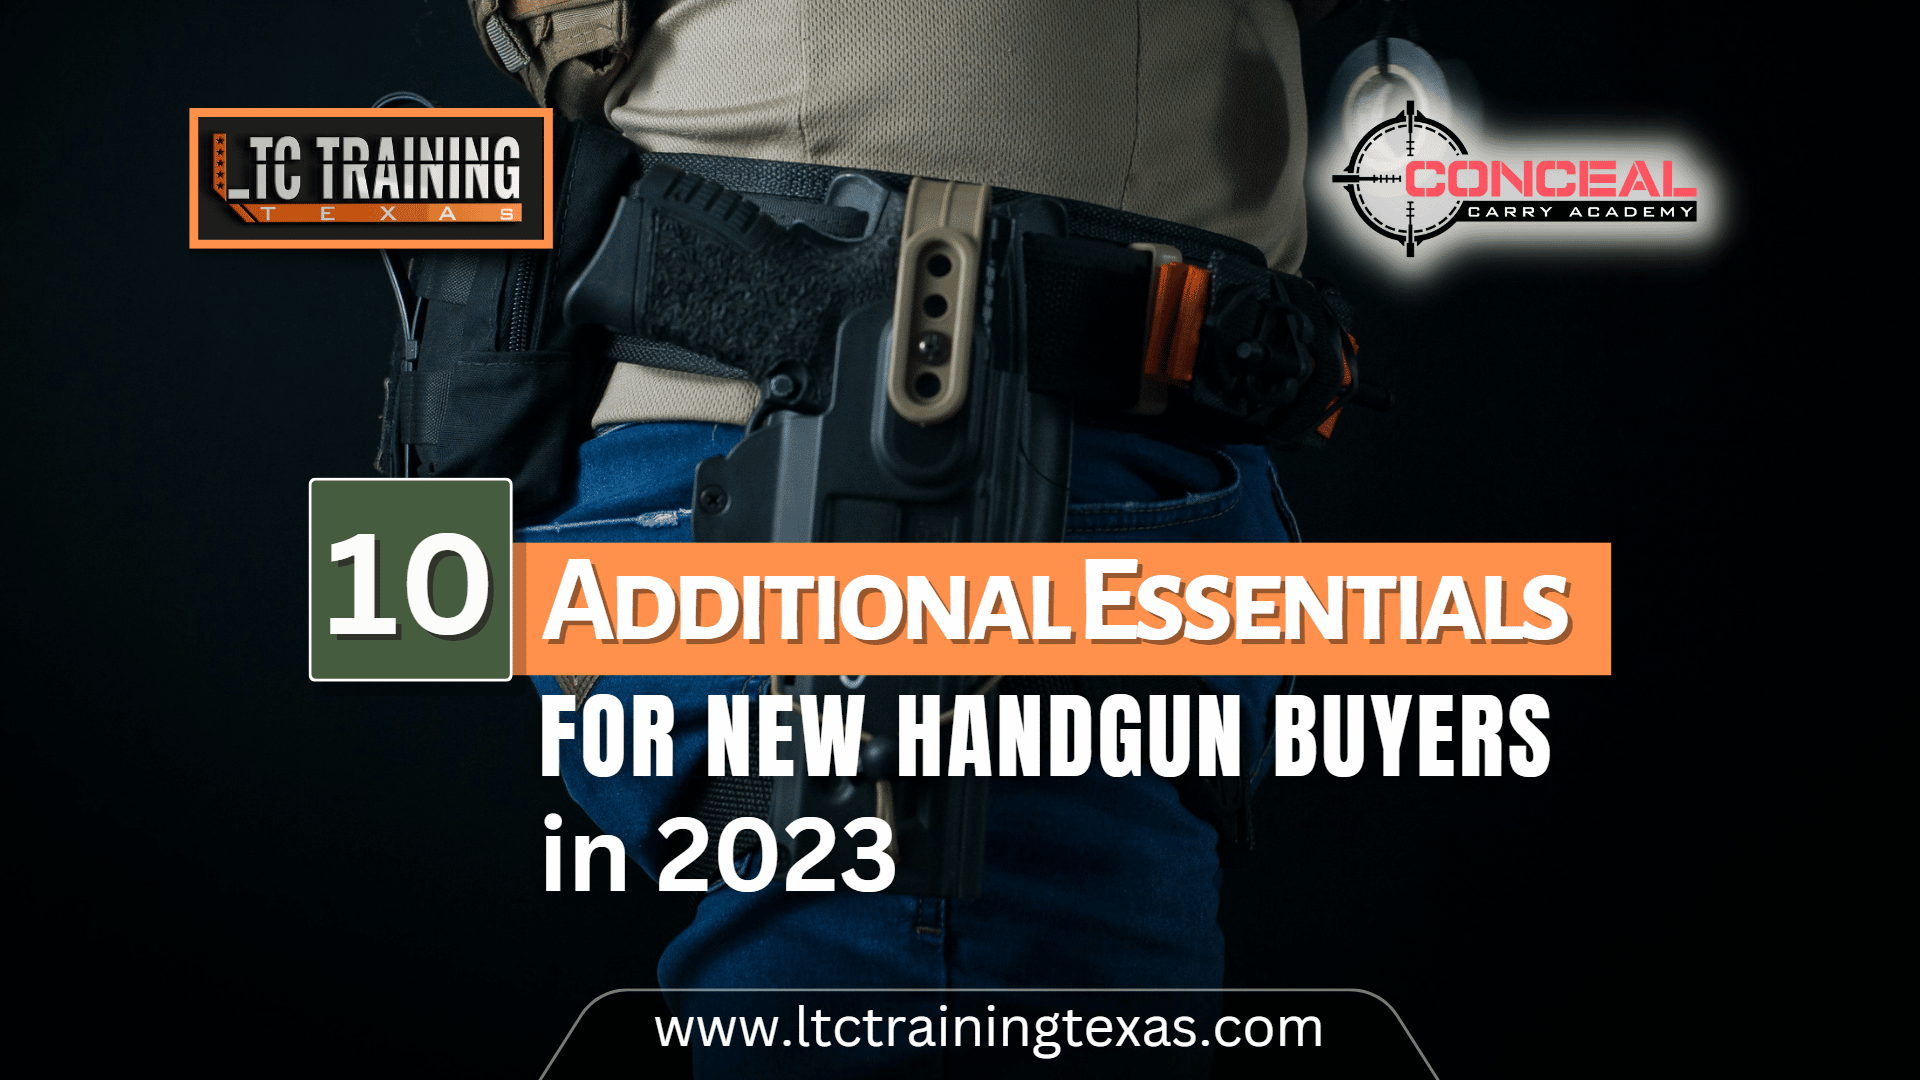 You are currently viewing 10 Additional Essentials for New Handgun Buyers in 2023